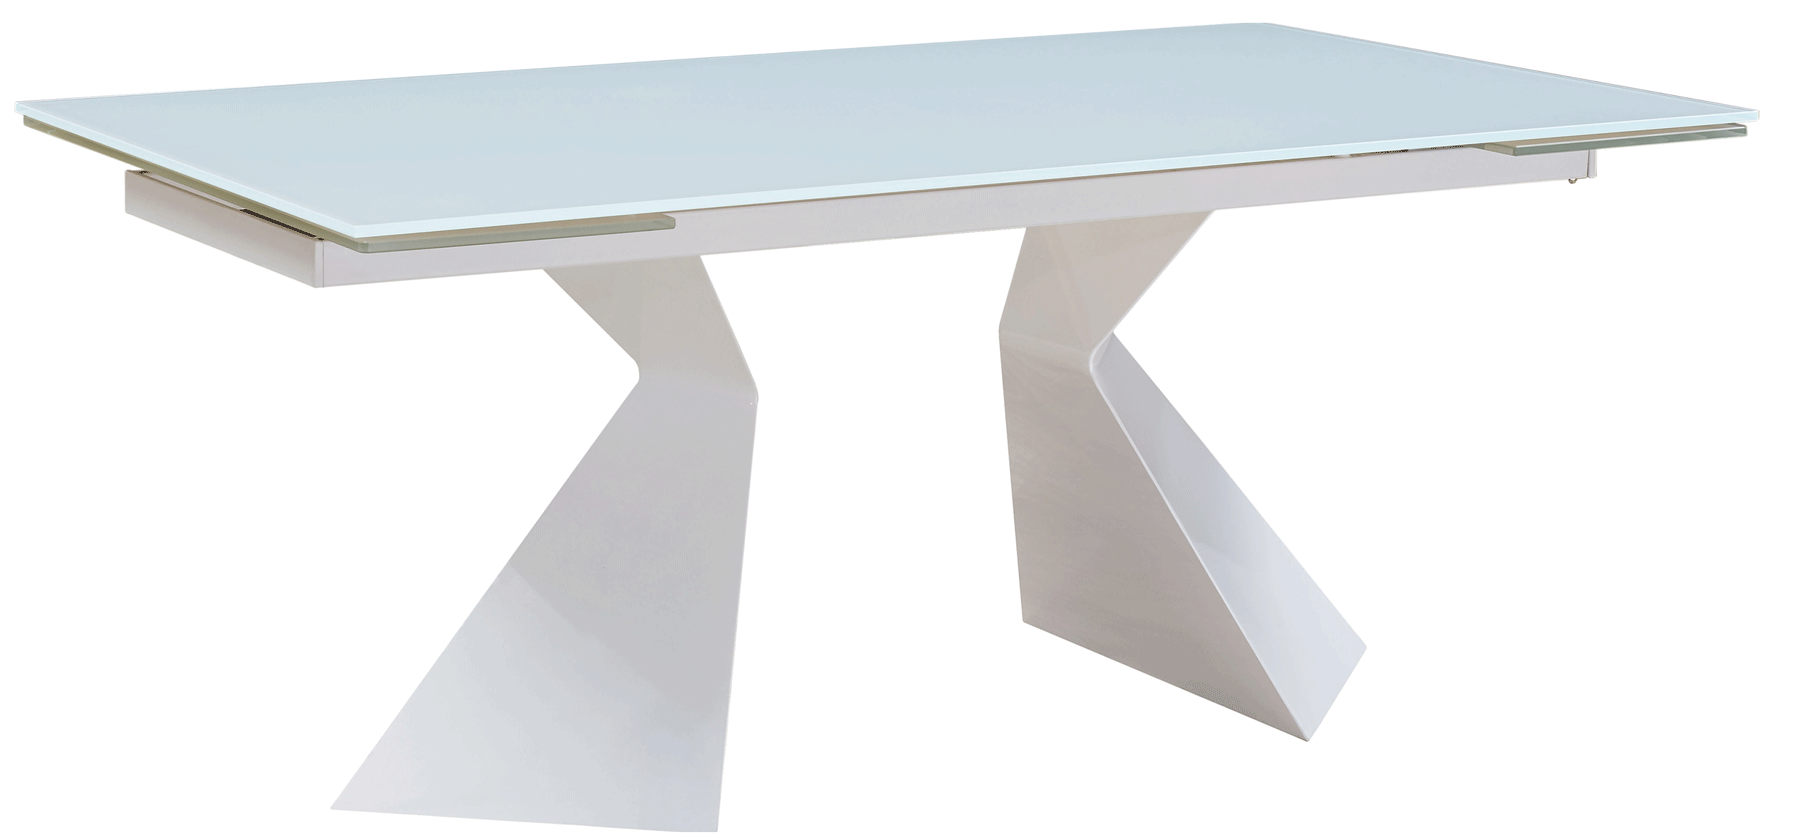 Wallunits Hallway Console tables and Mirrors 992 Table